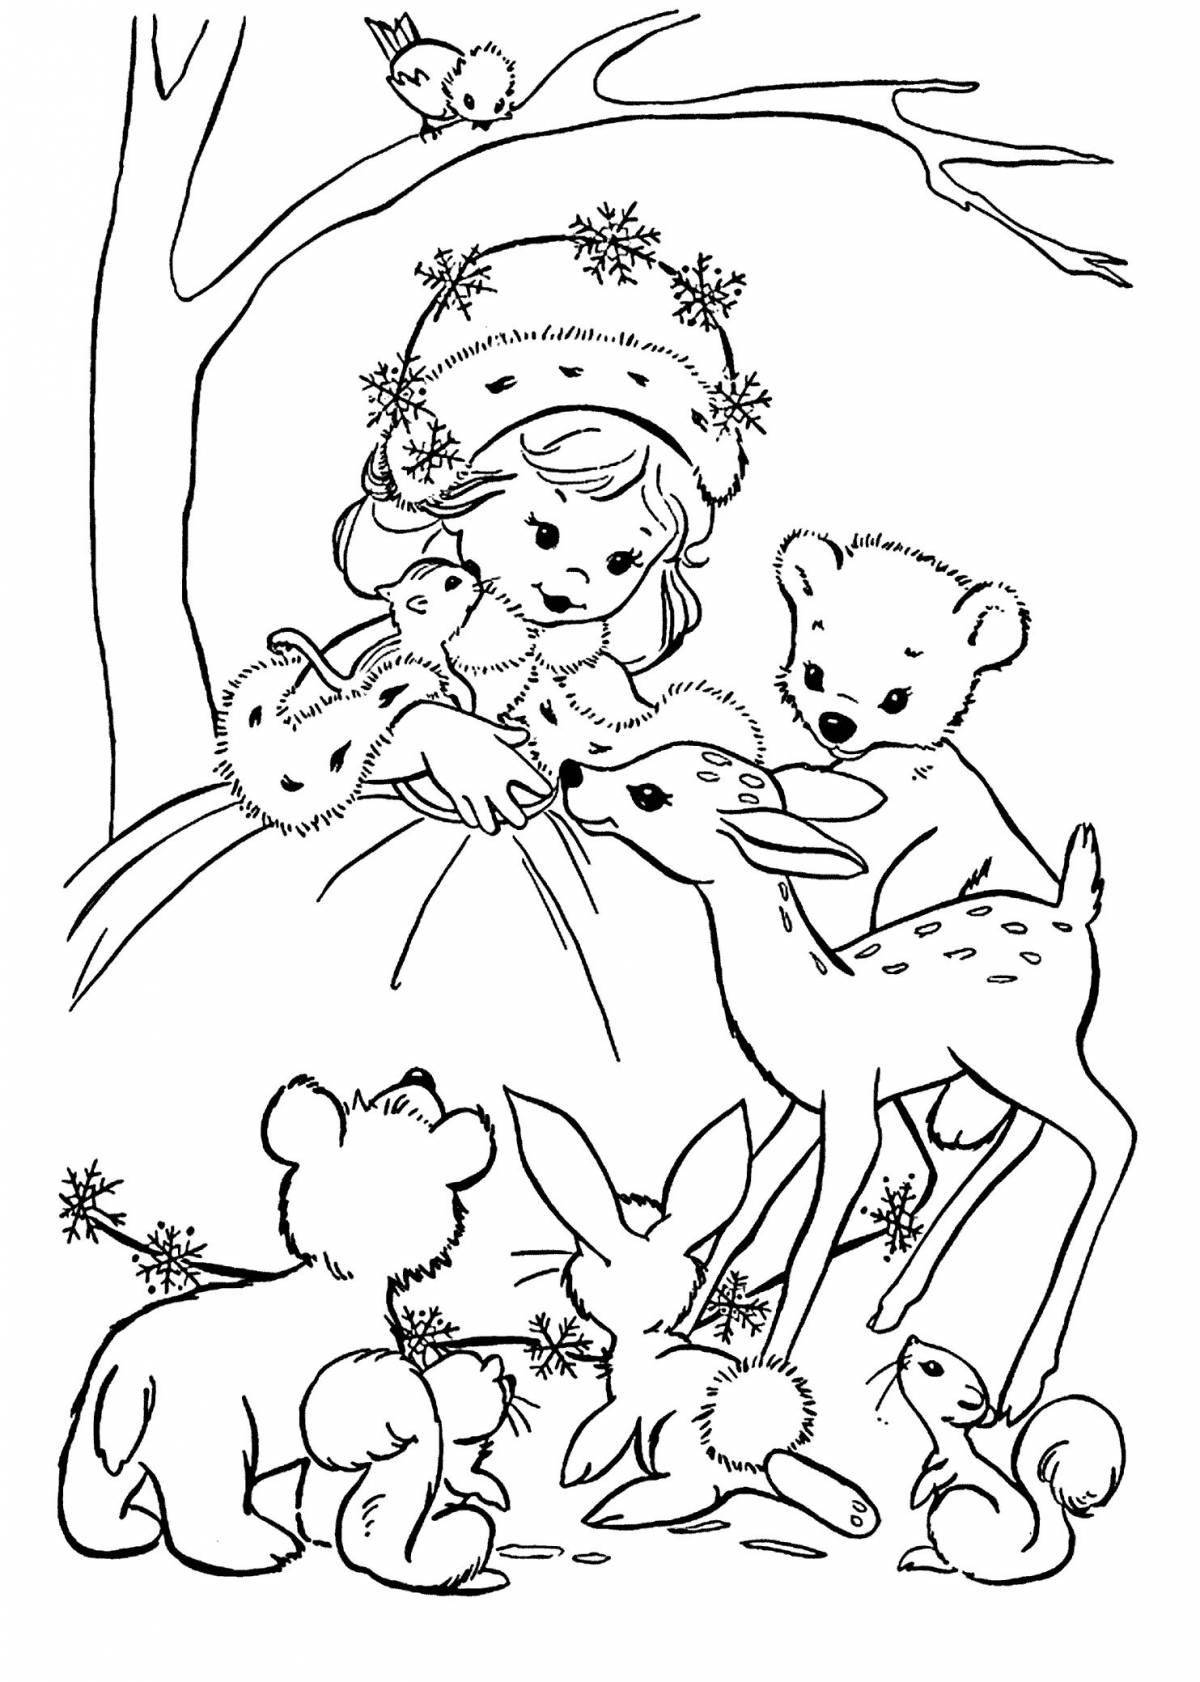 Coloring book of nice forest animals